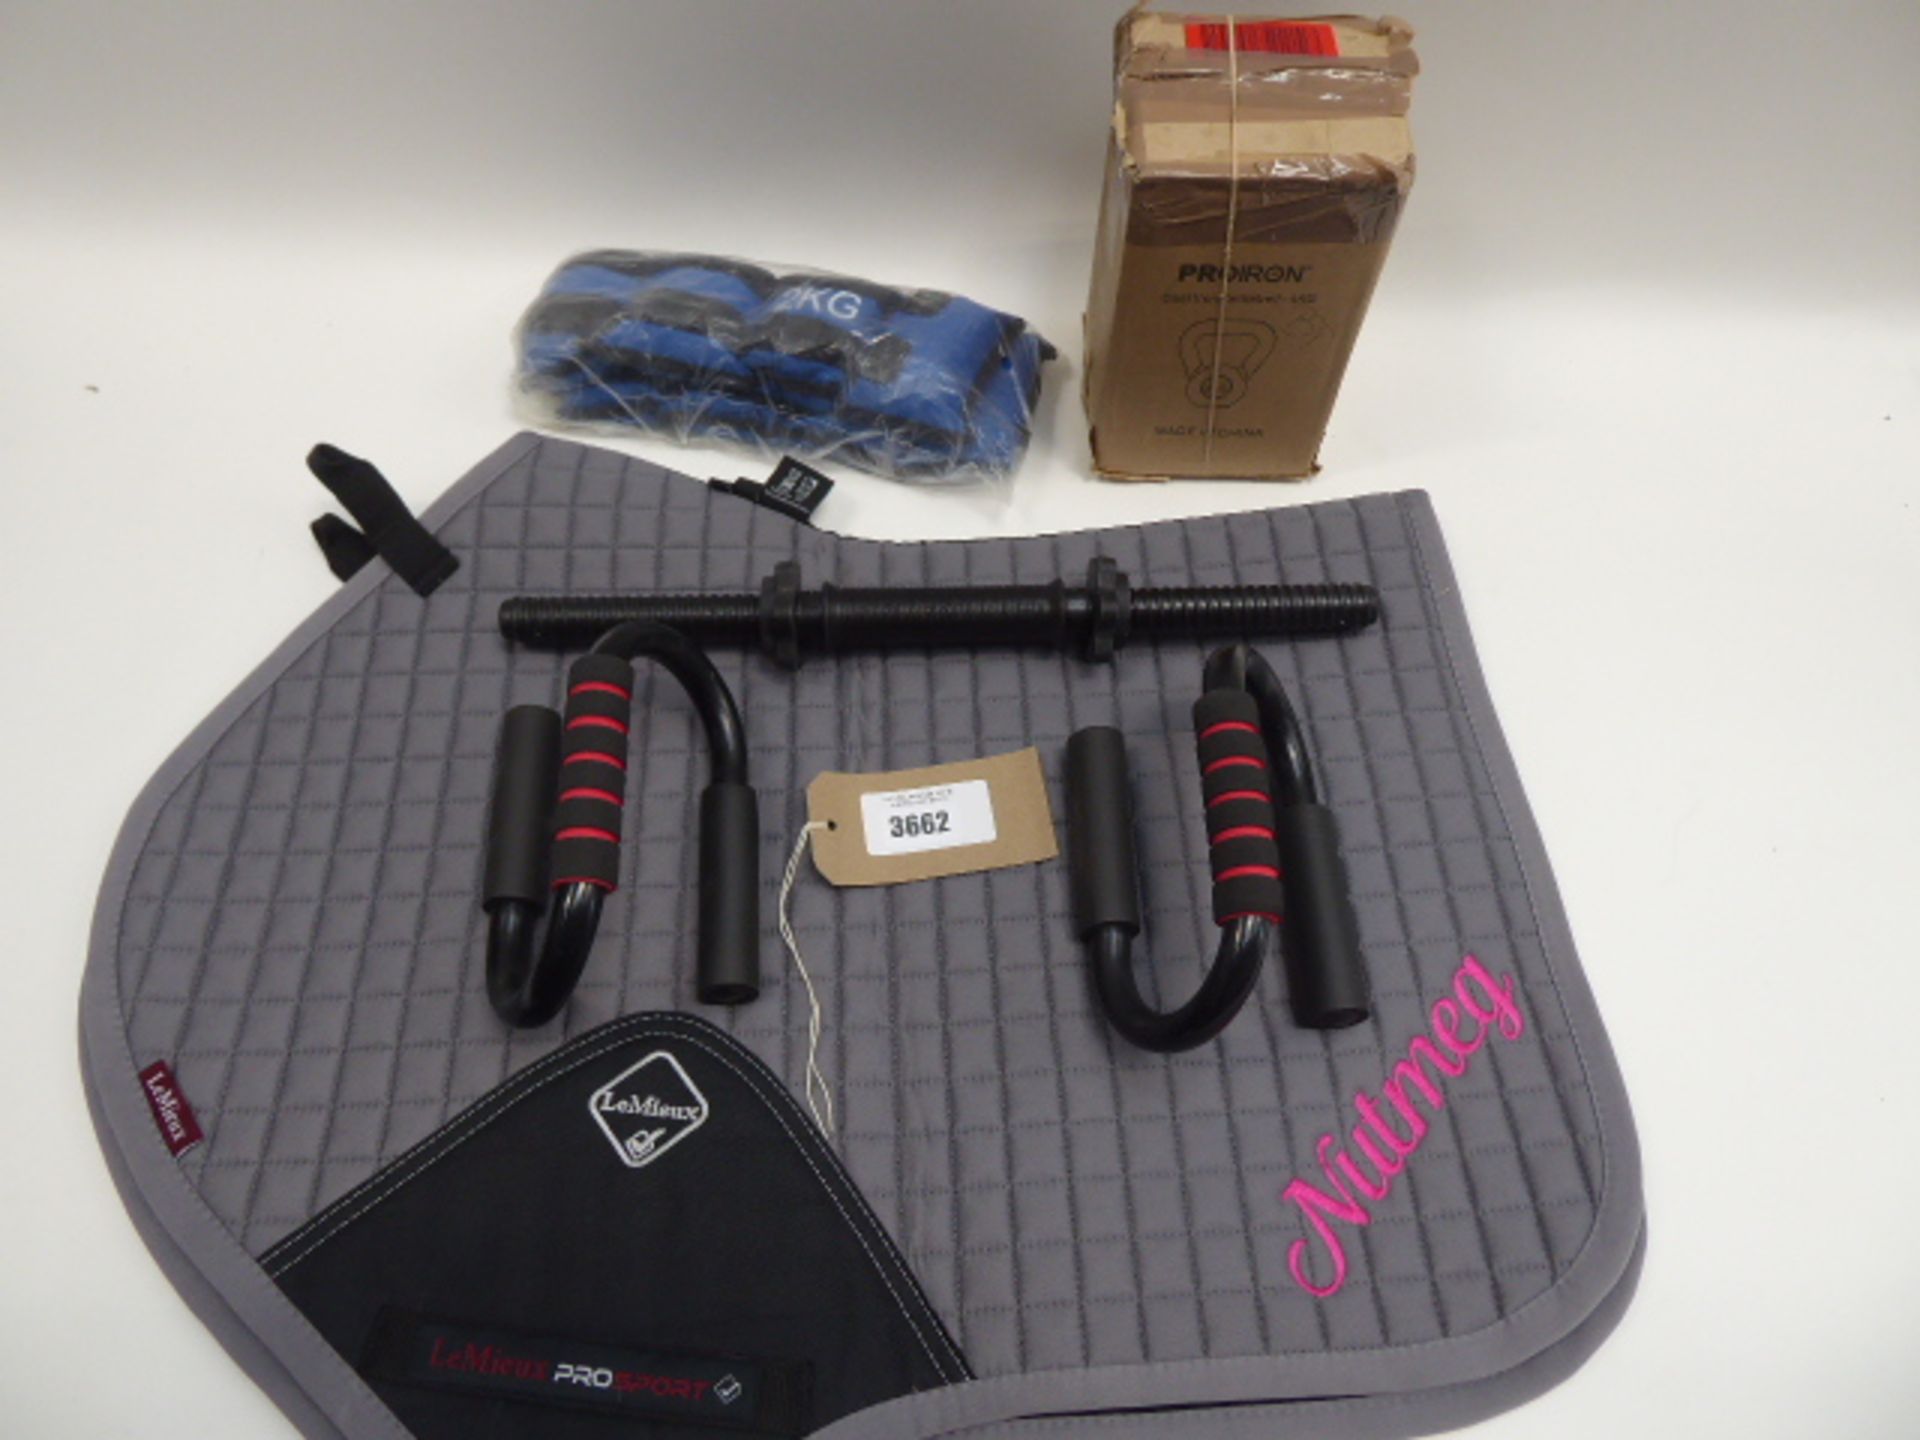 LeMieux Prosport Suede Gp Square Saddlepad, press up handles, 4KG kettle bell, weighted wearable